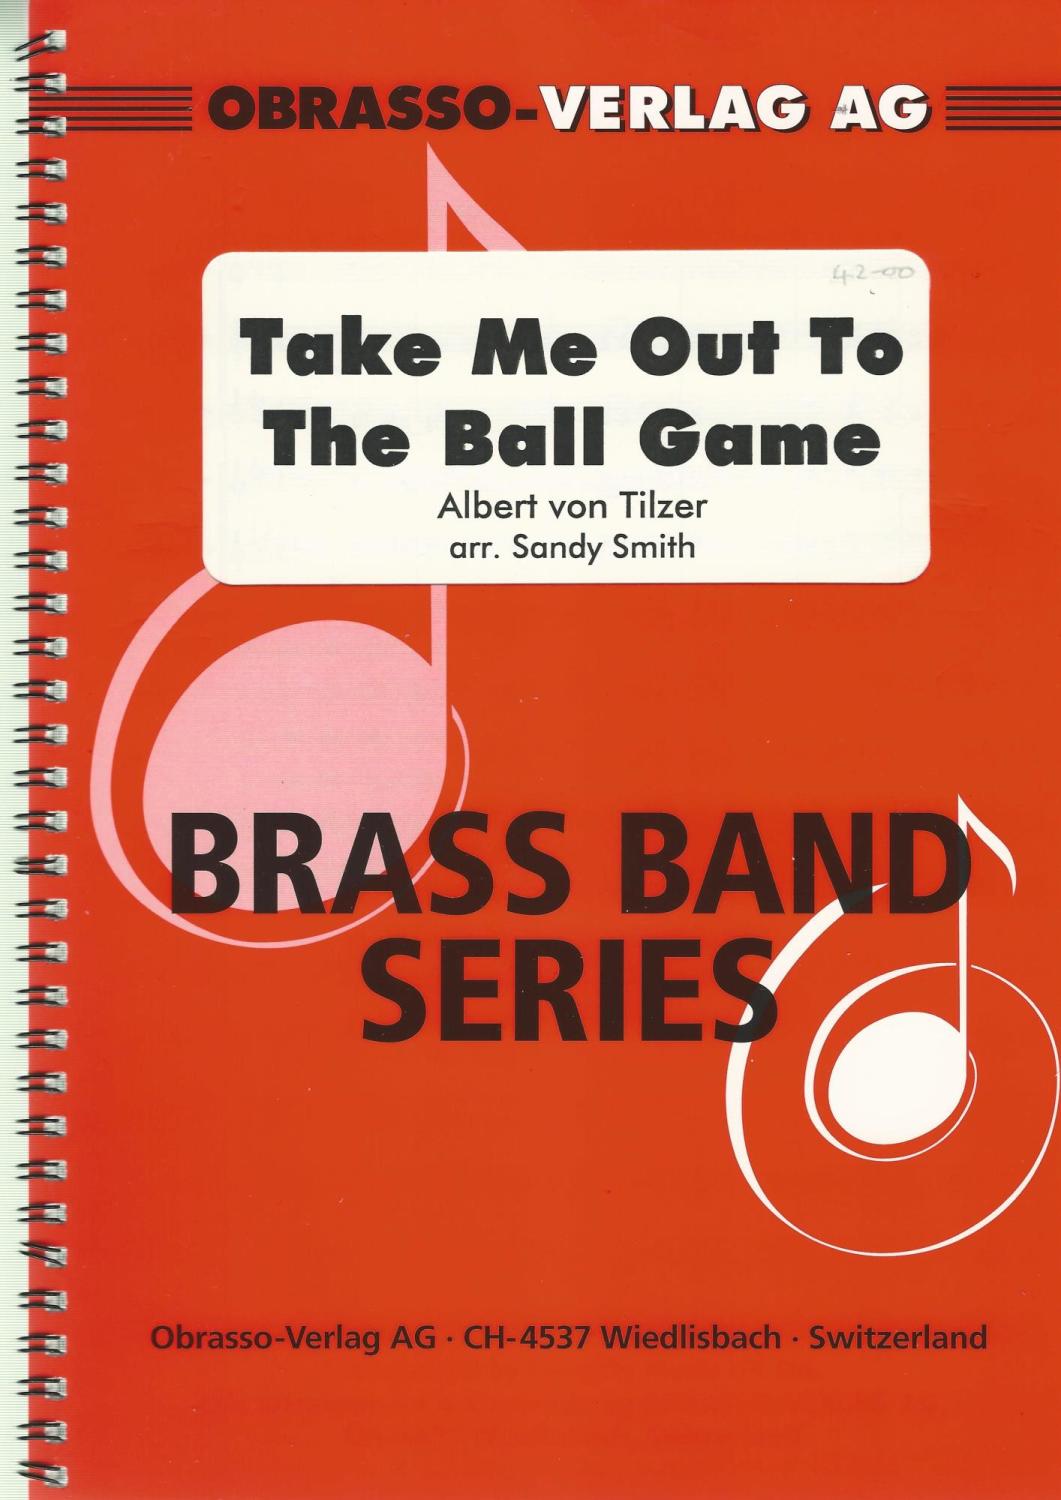 Take Me Out to The Ball Game for Brass Band - Albert von Tilzer arr. Sandy 